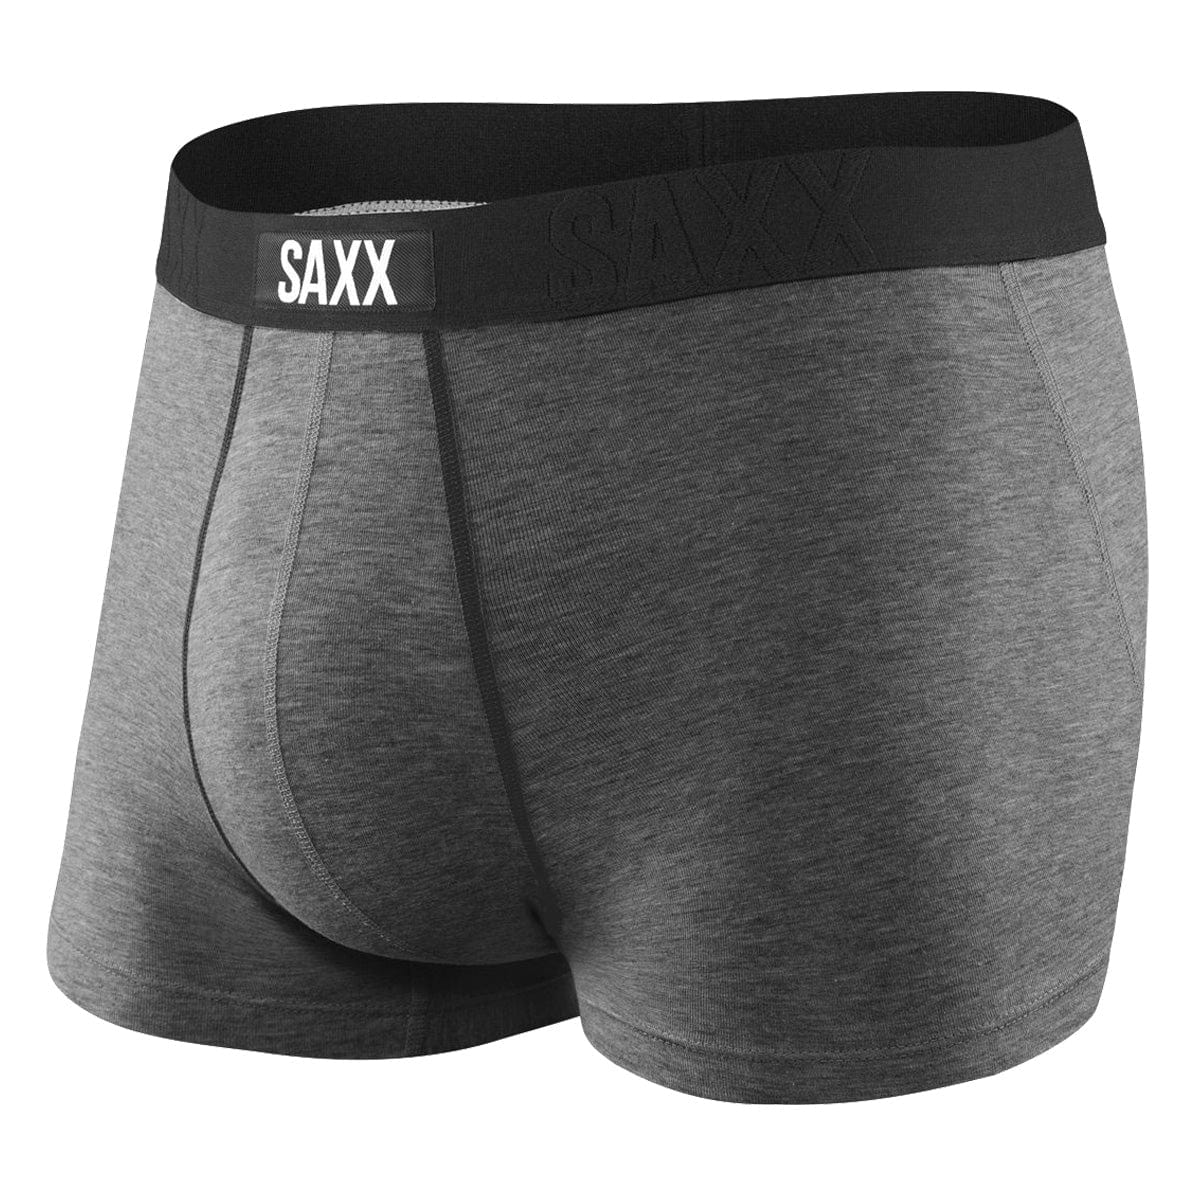 Saxx Vibe Boxers (Trunk Fit) - Salt & Pepper - The Hockey Shop Source For Sports